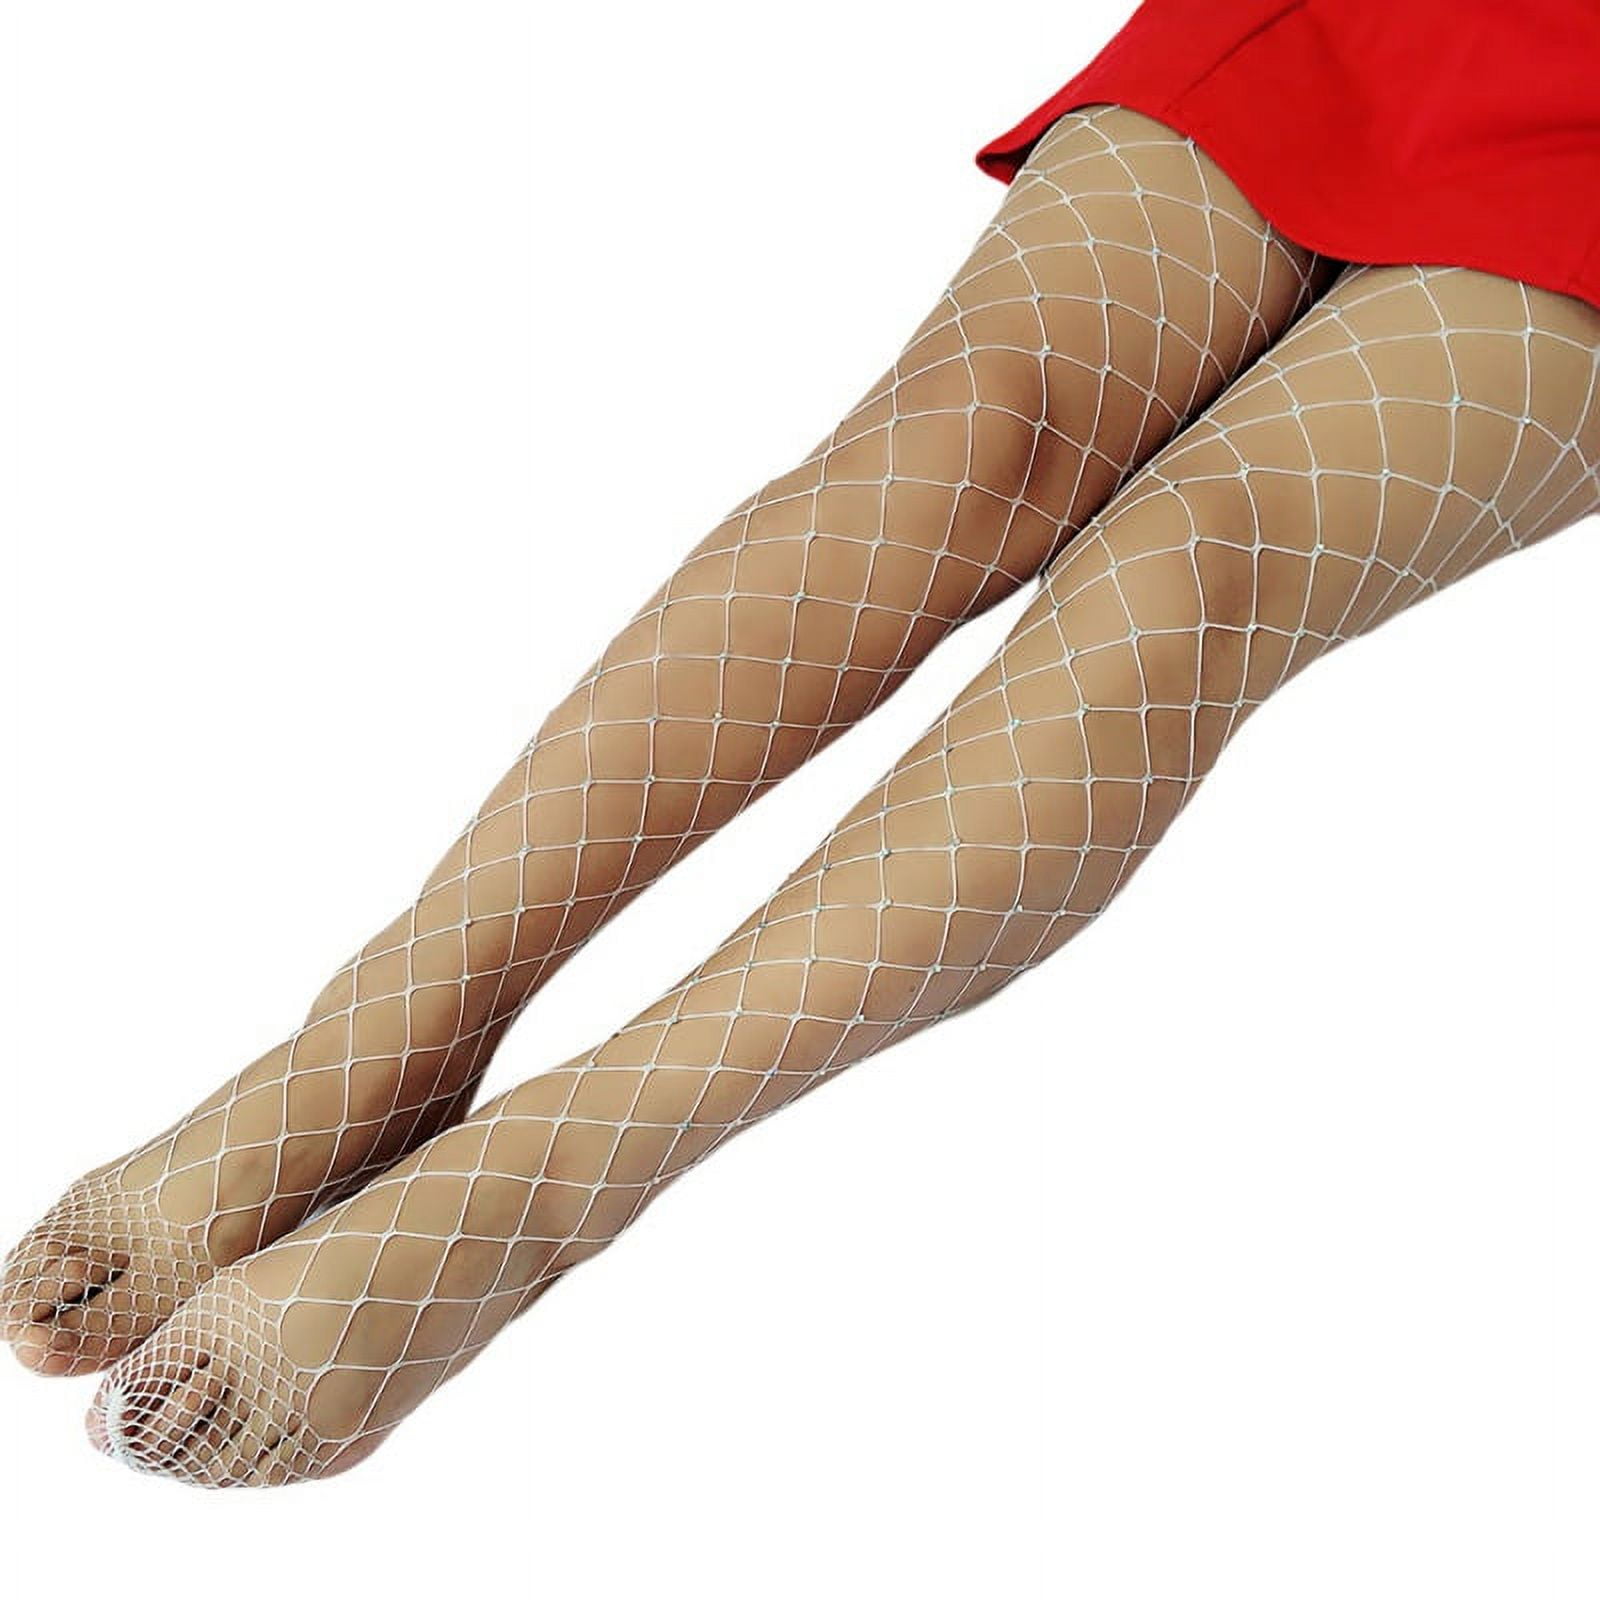 Up To 81% Off on 6-Pack Fishnet Tights Regular... | Groupon Goods